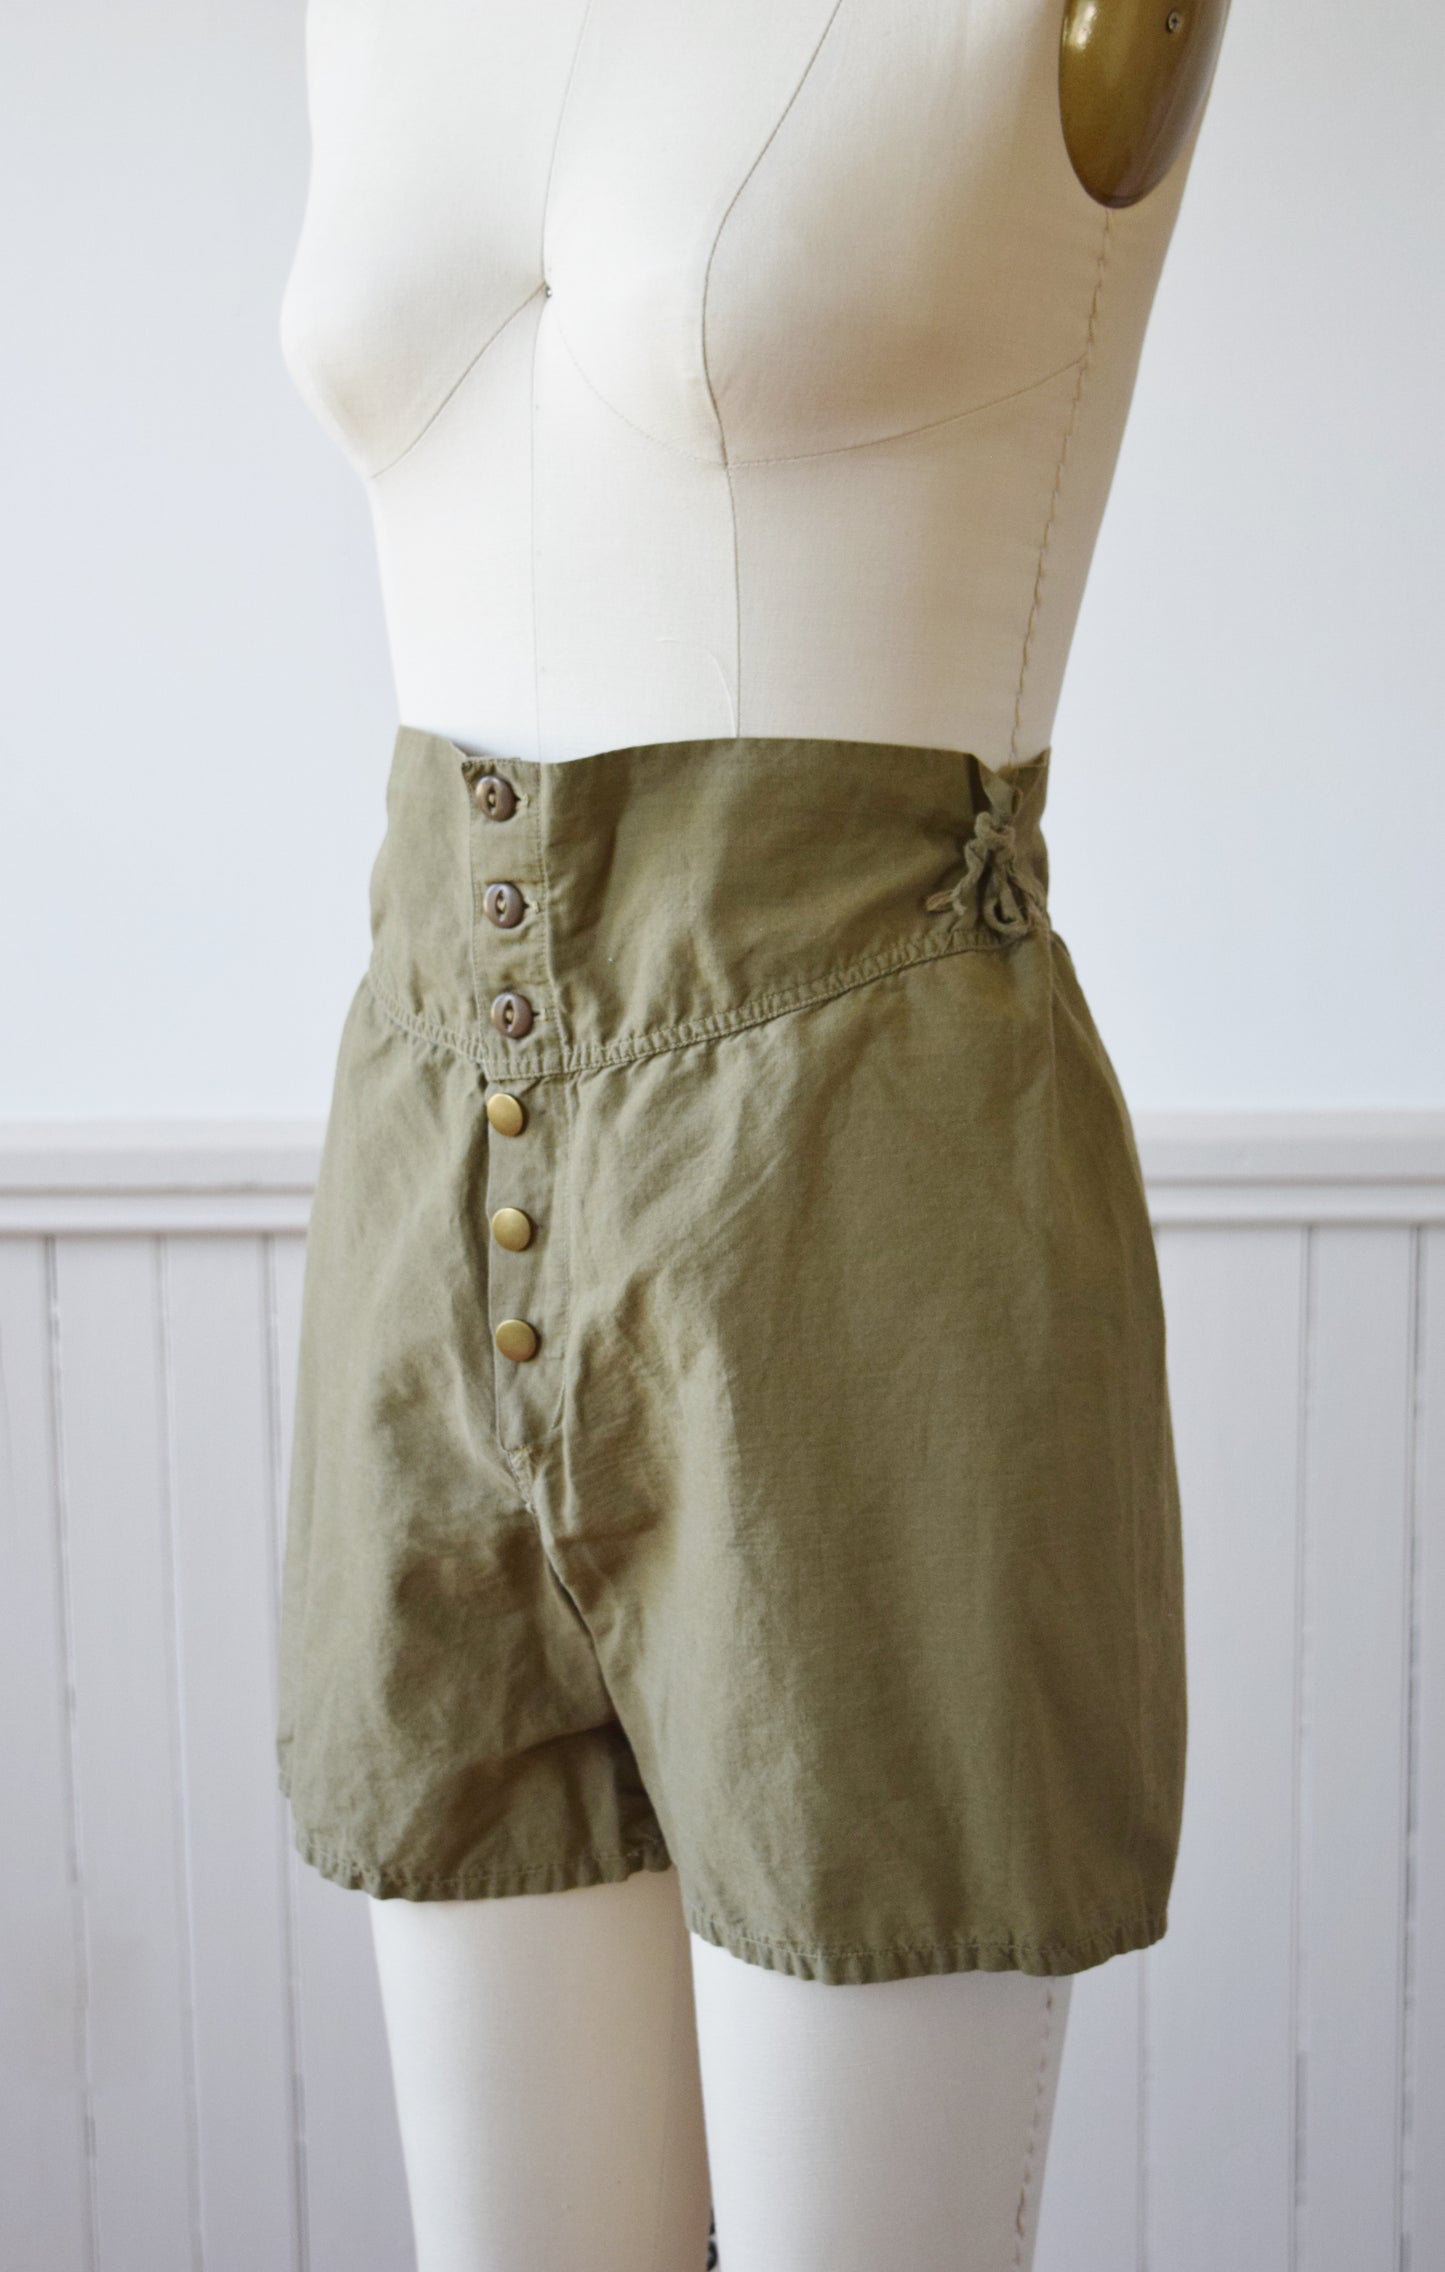 Army Issue Boxer Shorts | 1940s | 3 | S/M